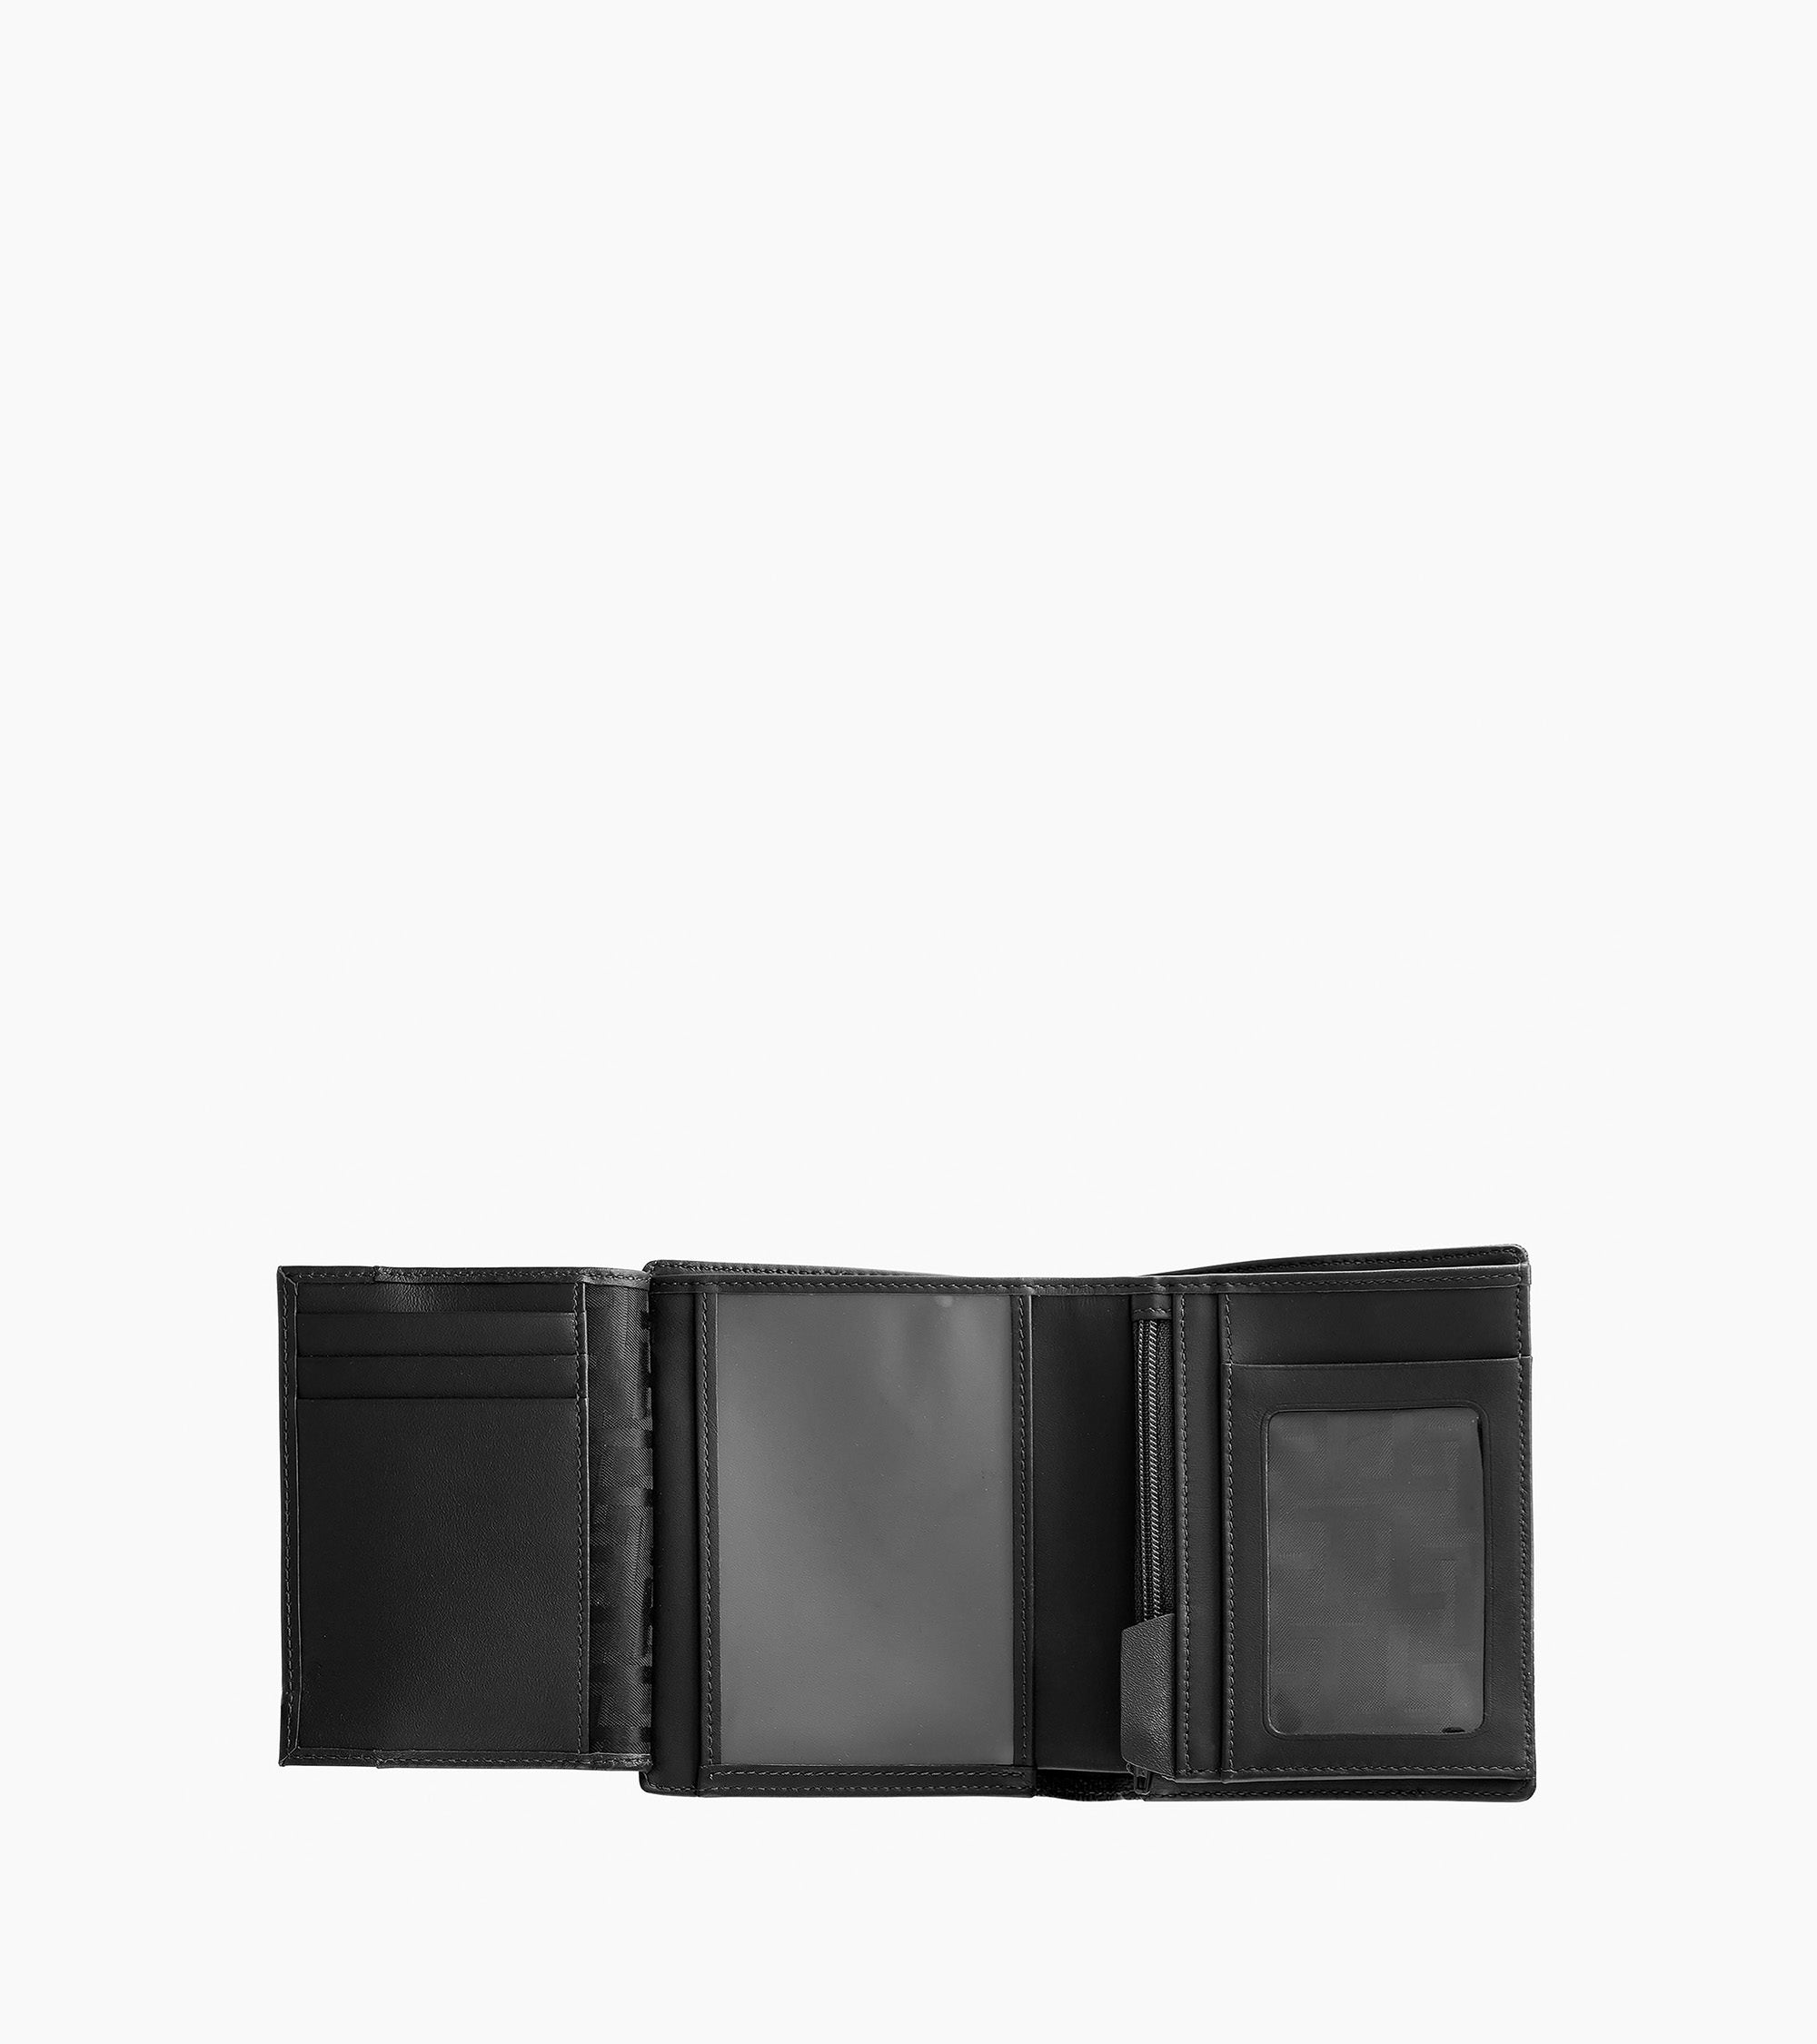 Zipped pocket and 2 shutters Emile T signature leather wallet